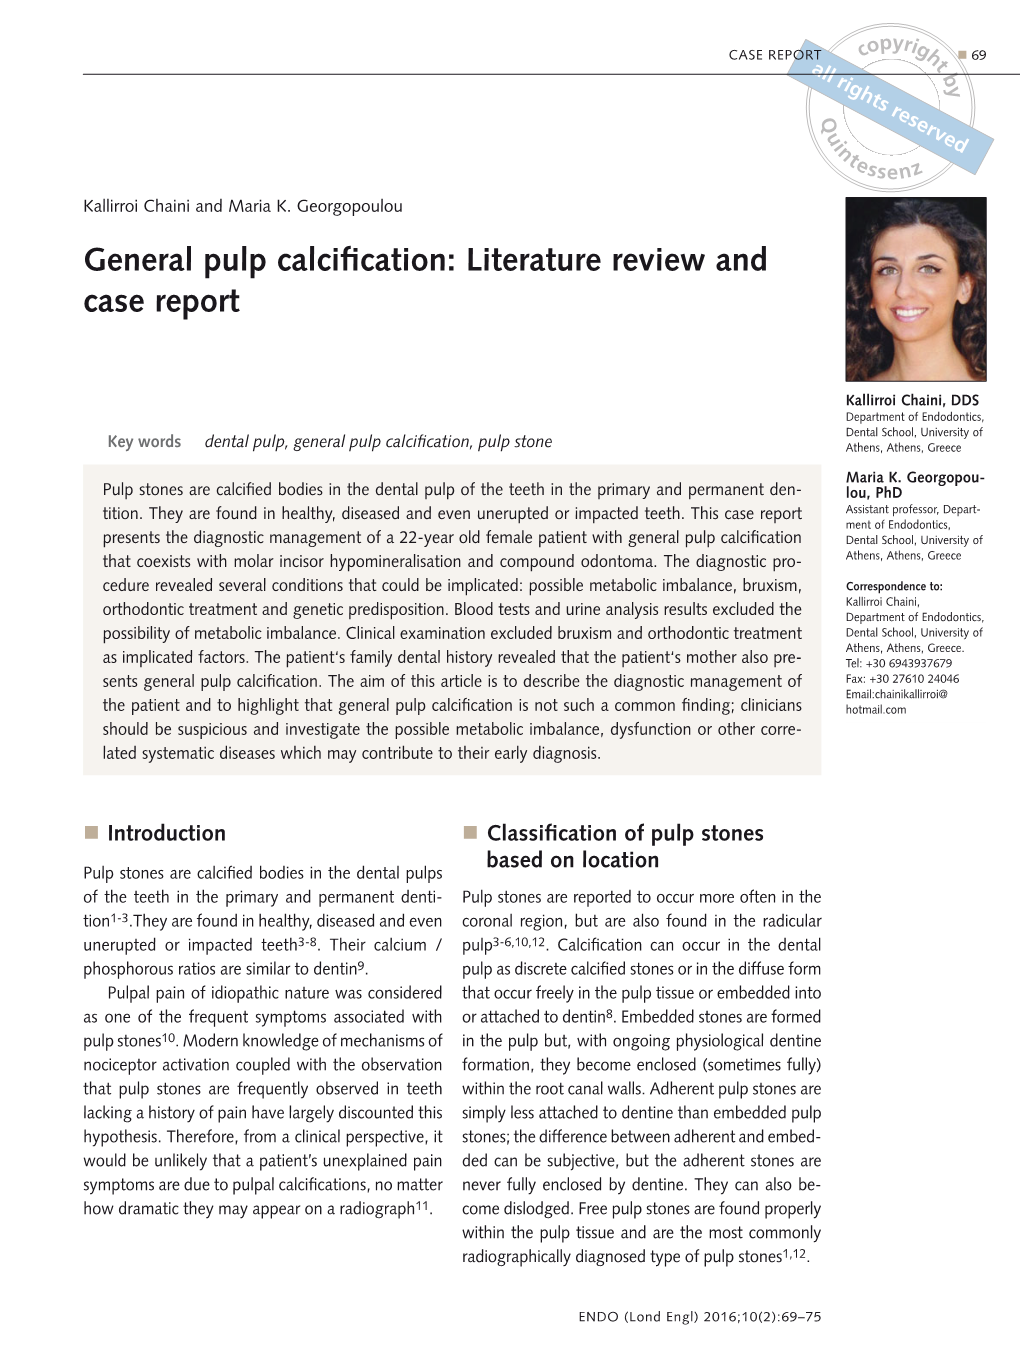 General Pulp Calcification: Literature Review and Case Report